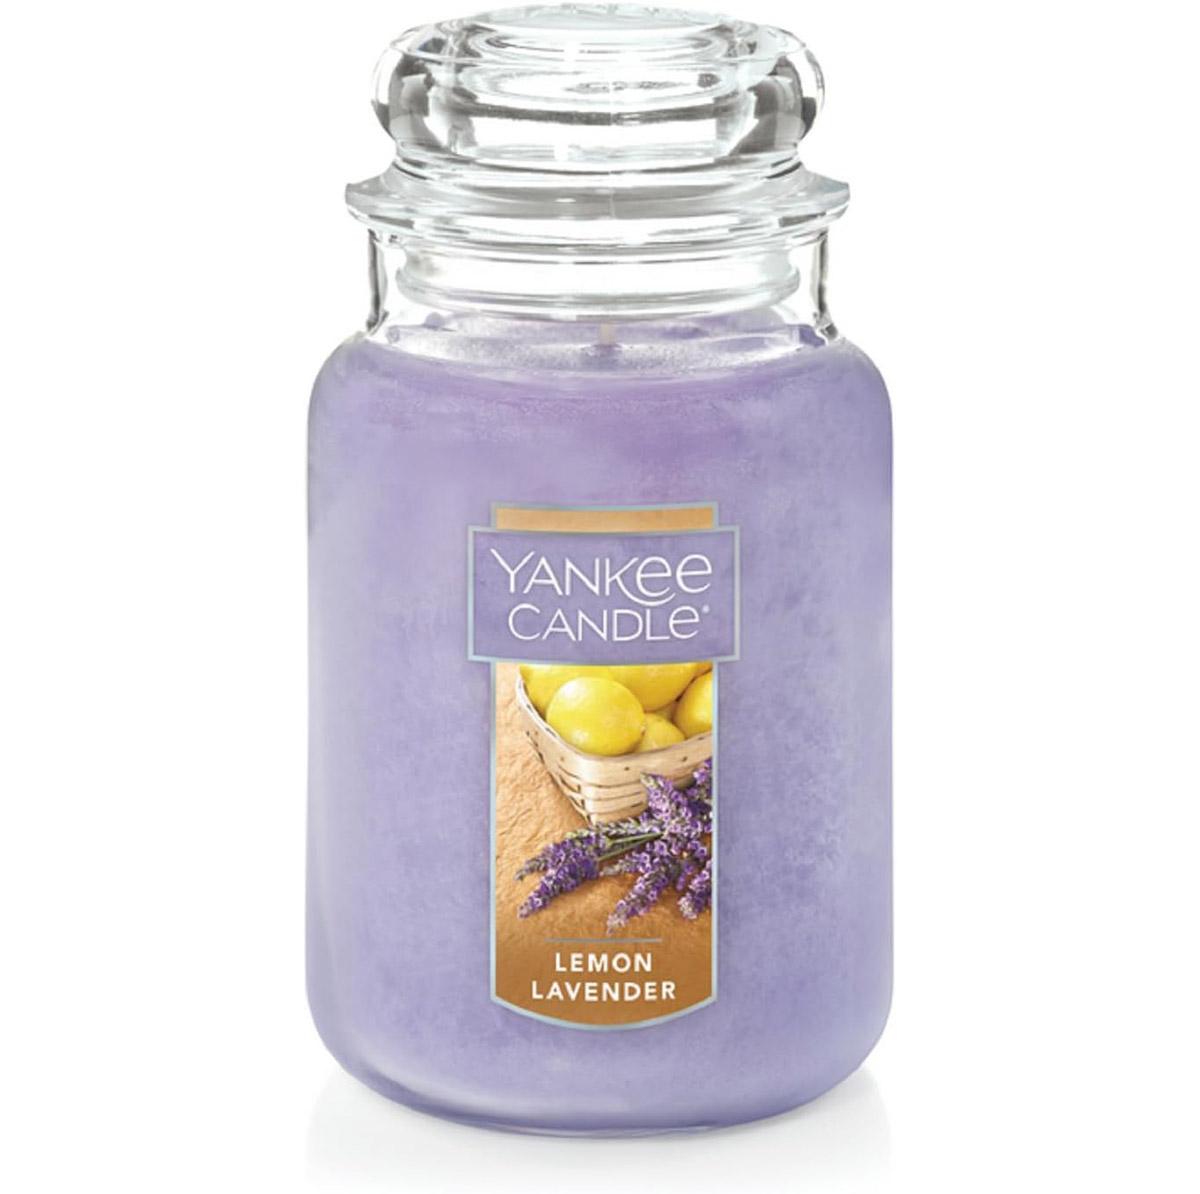 Yankee Candle Lemon Lavender Scented for $9.87 Shipped